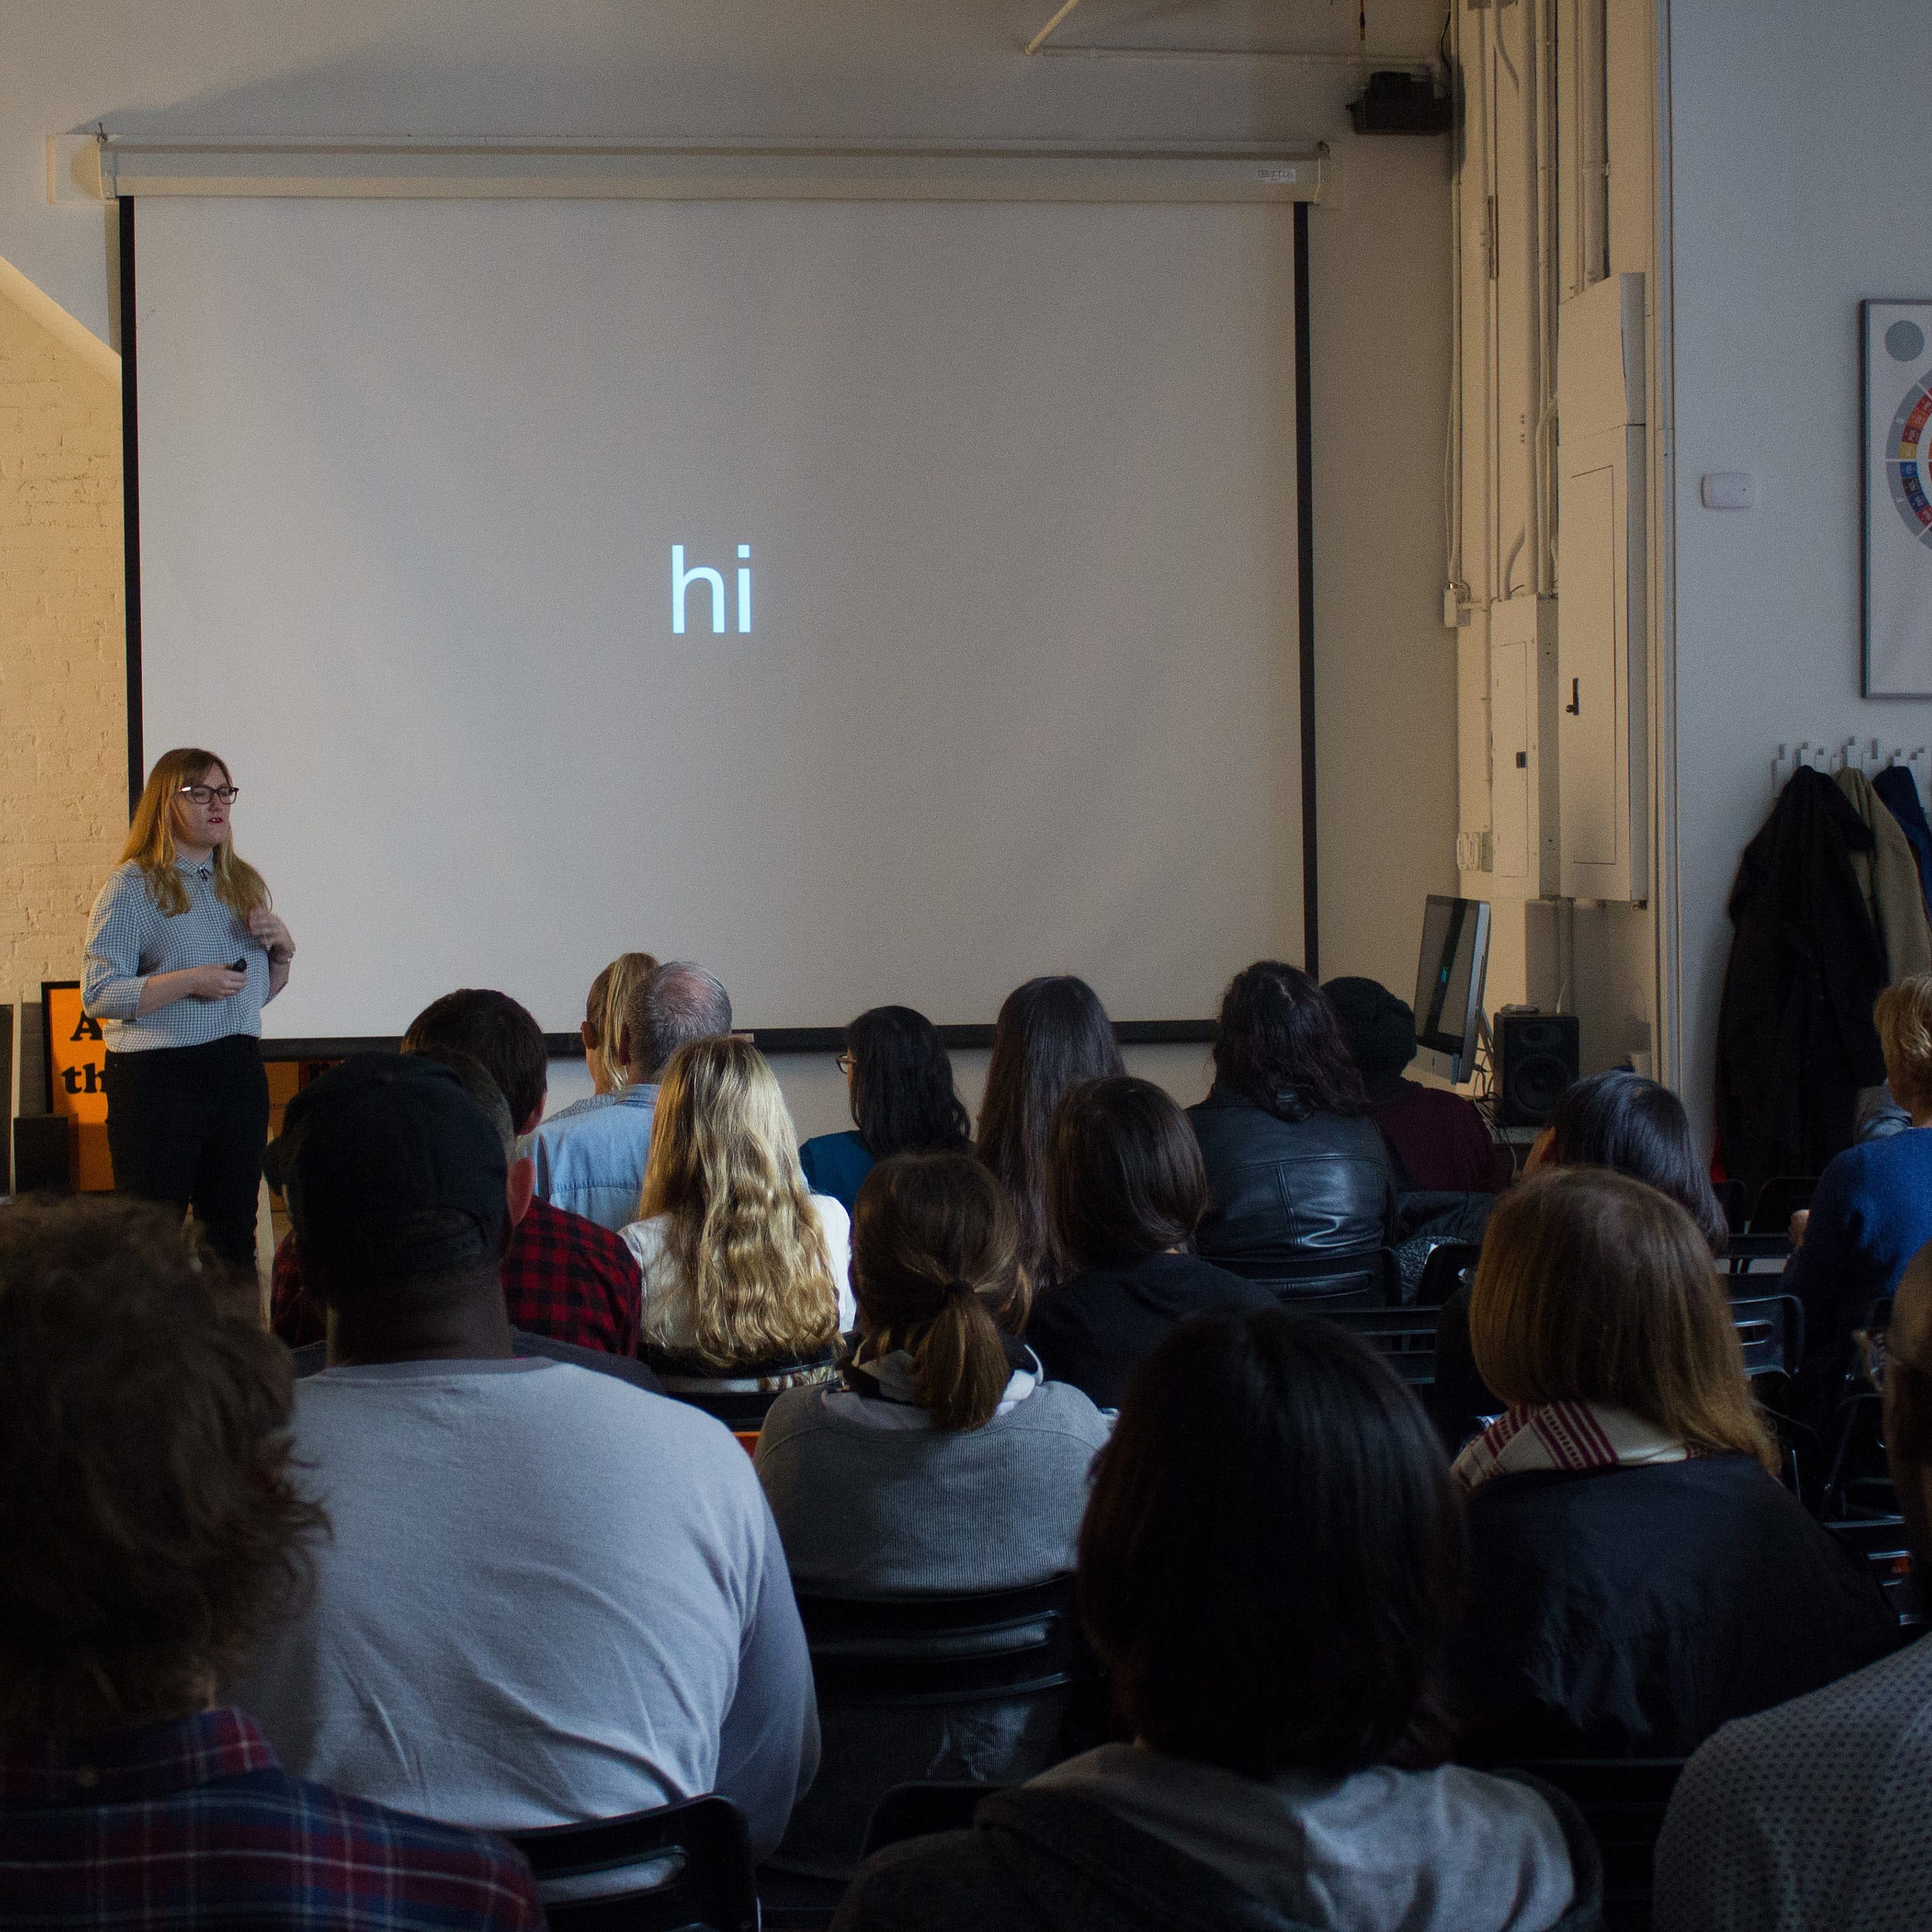 A woman stands in front of a large screen that displays the word "hi" in a room filled with seated people. She is giving a presentation in a casual, well-lit environment with various items and decorations visible around the room.